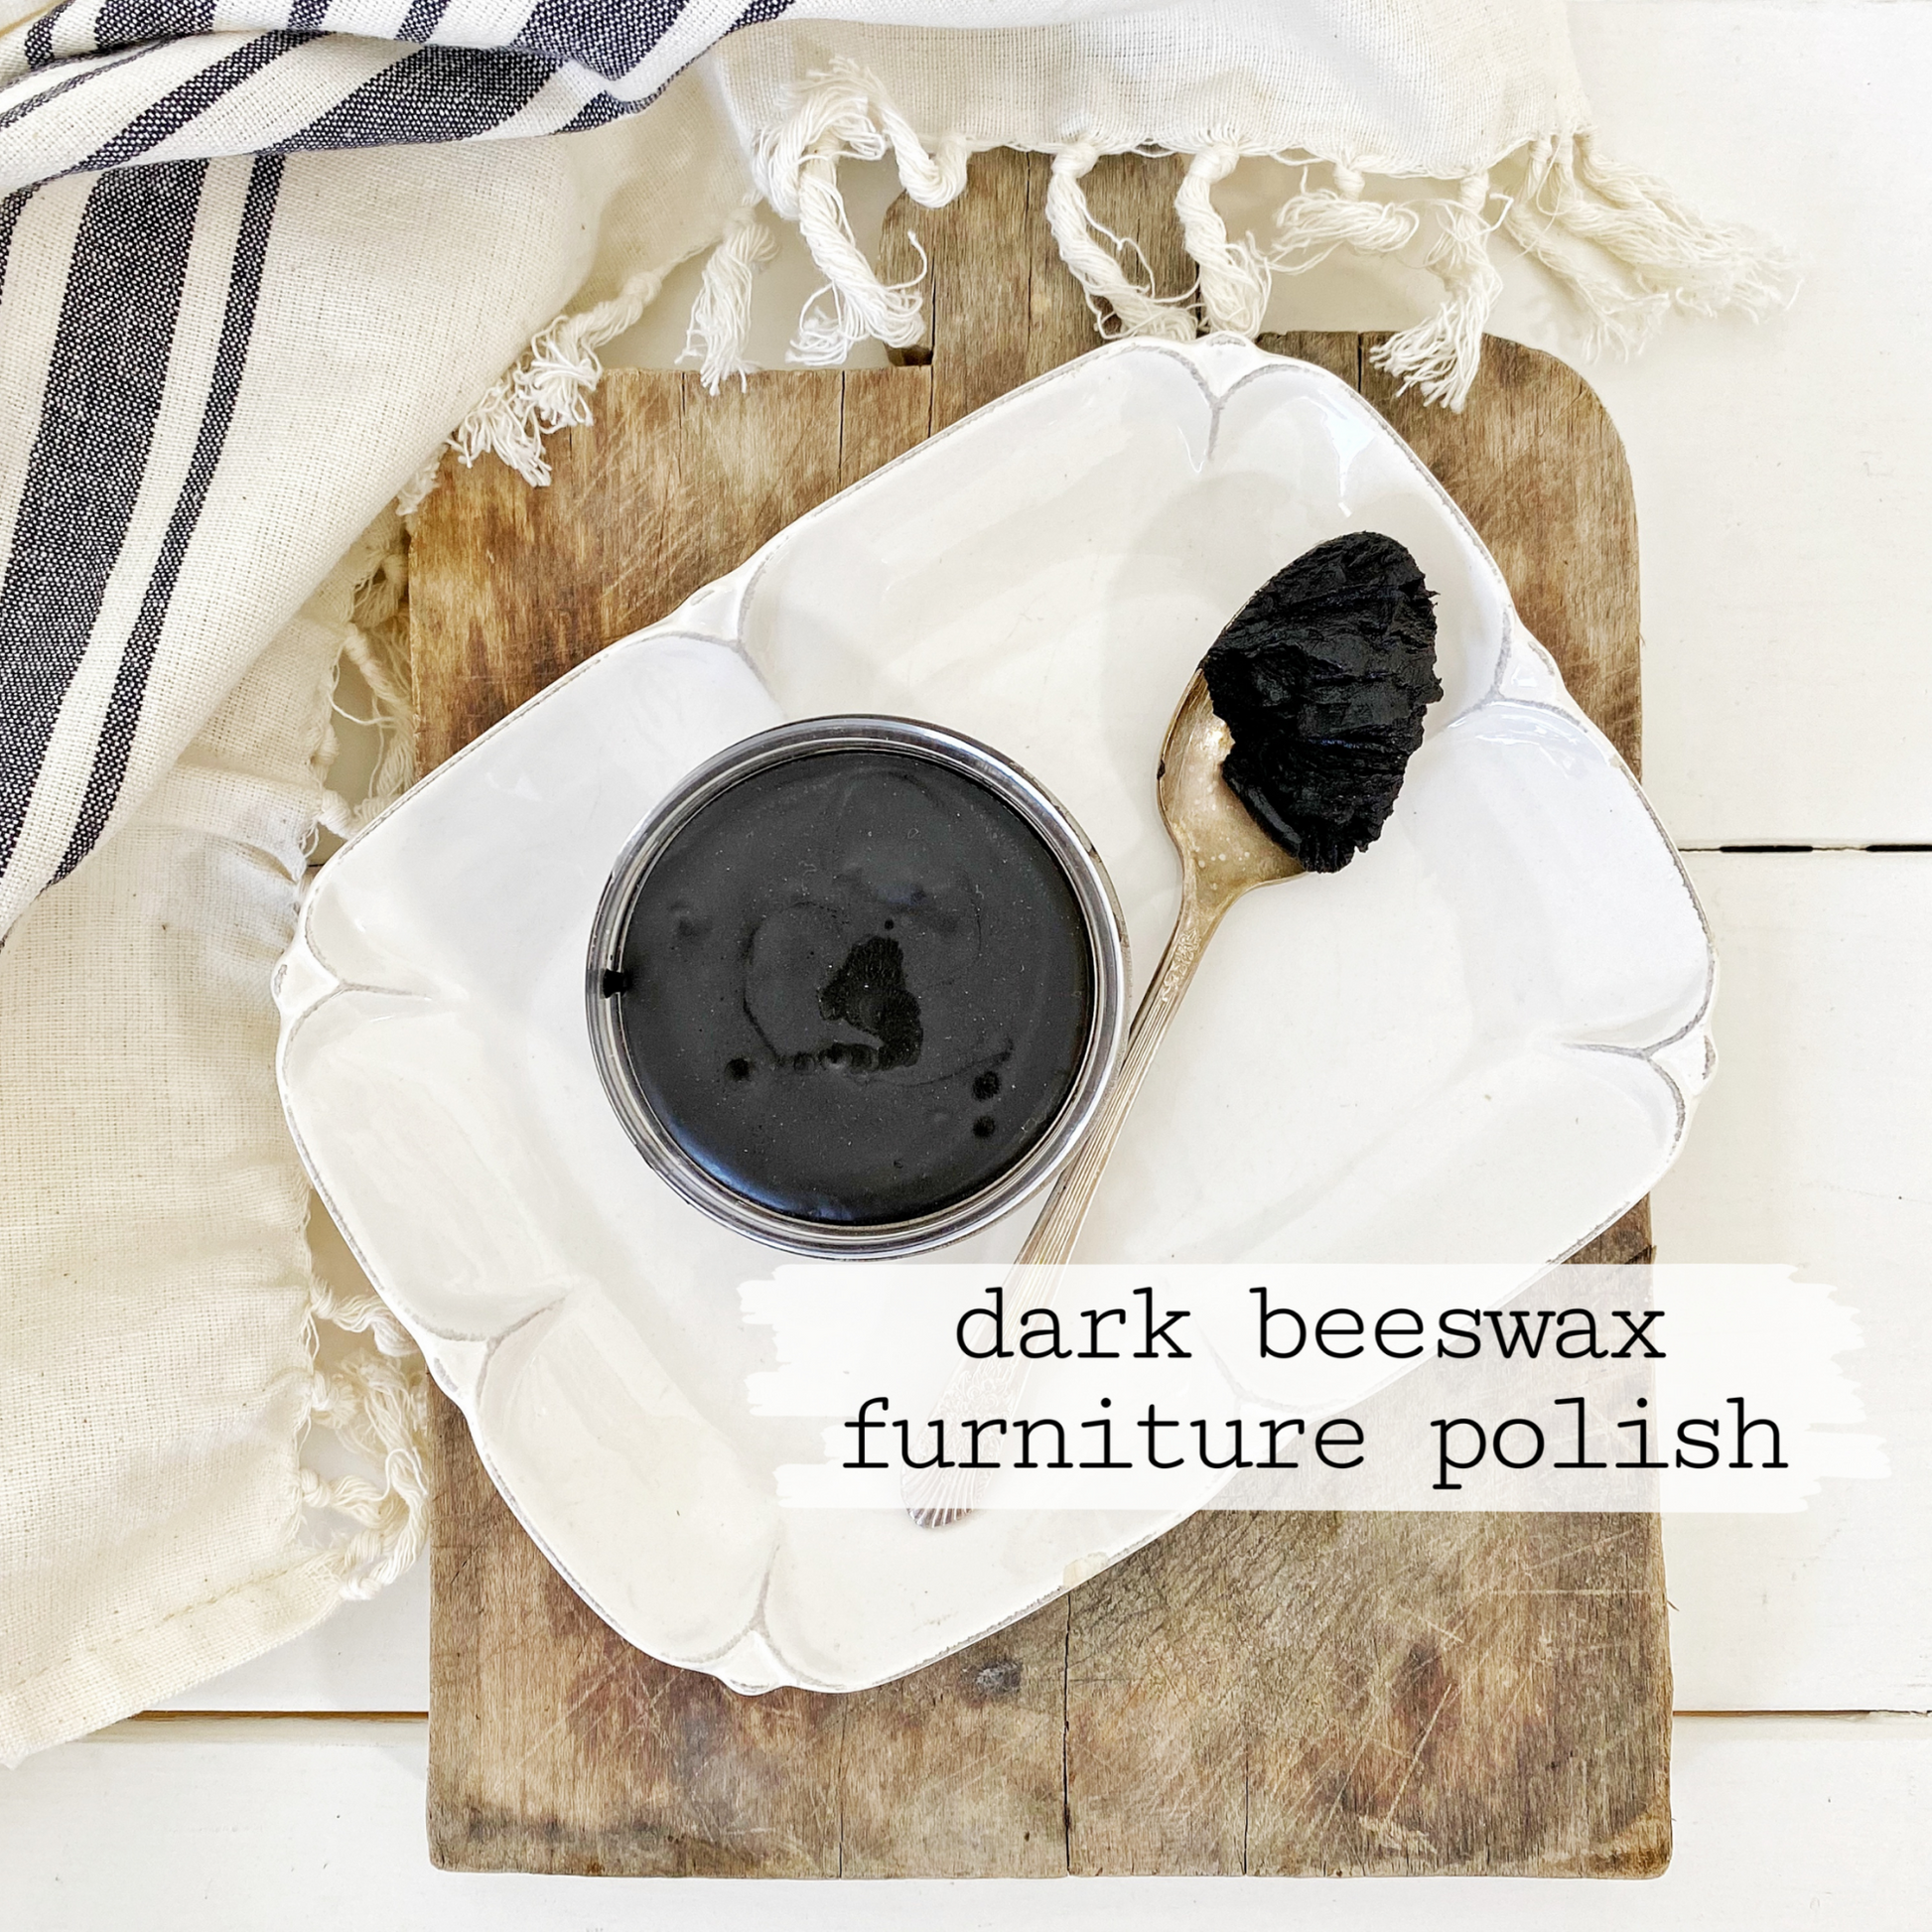 Product photo of dark (brown) beeswax furniture polish available at Milton's Daughter